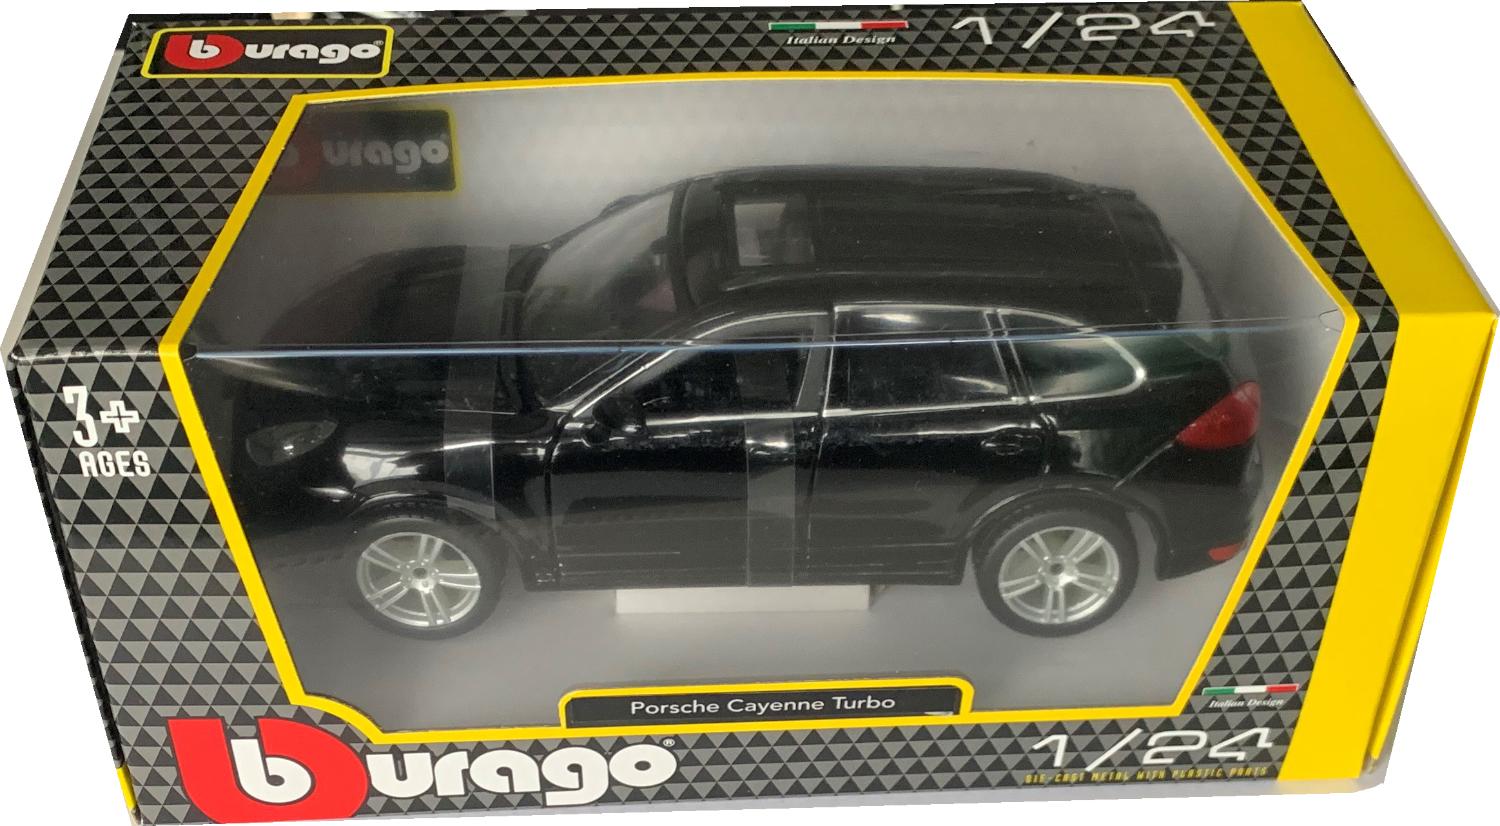 An excellent reproduction of the Porsche Cayenne Turbo with high level of detail throughout, all authentically recreated. The model is presented in a window display box, the car is approx. 19 cm long and the presentation box is 23 cm long